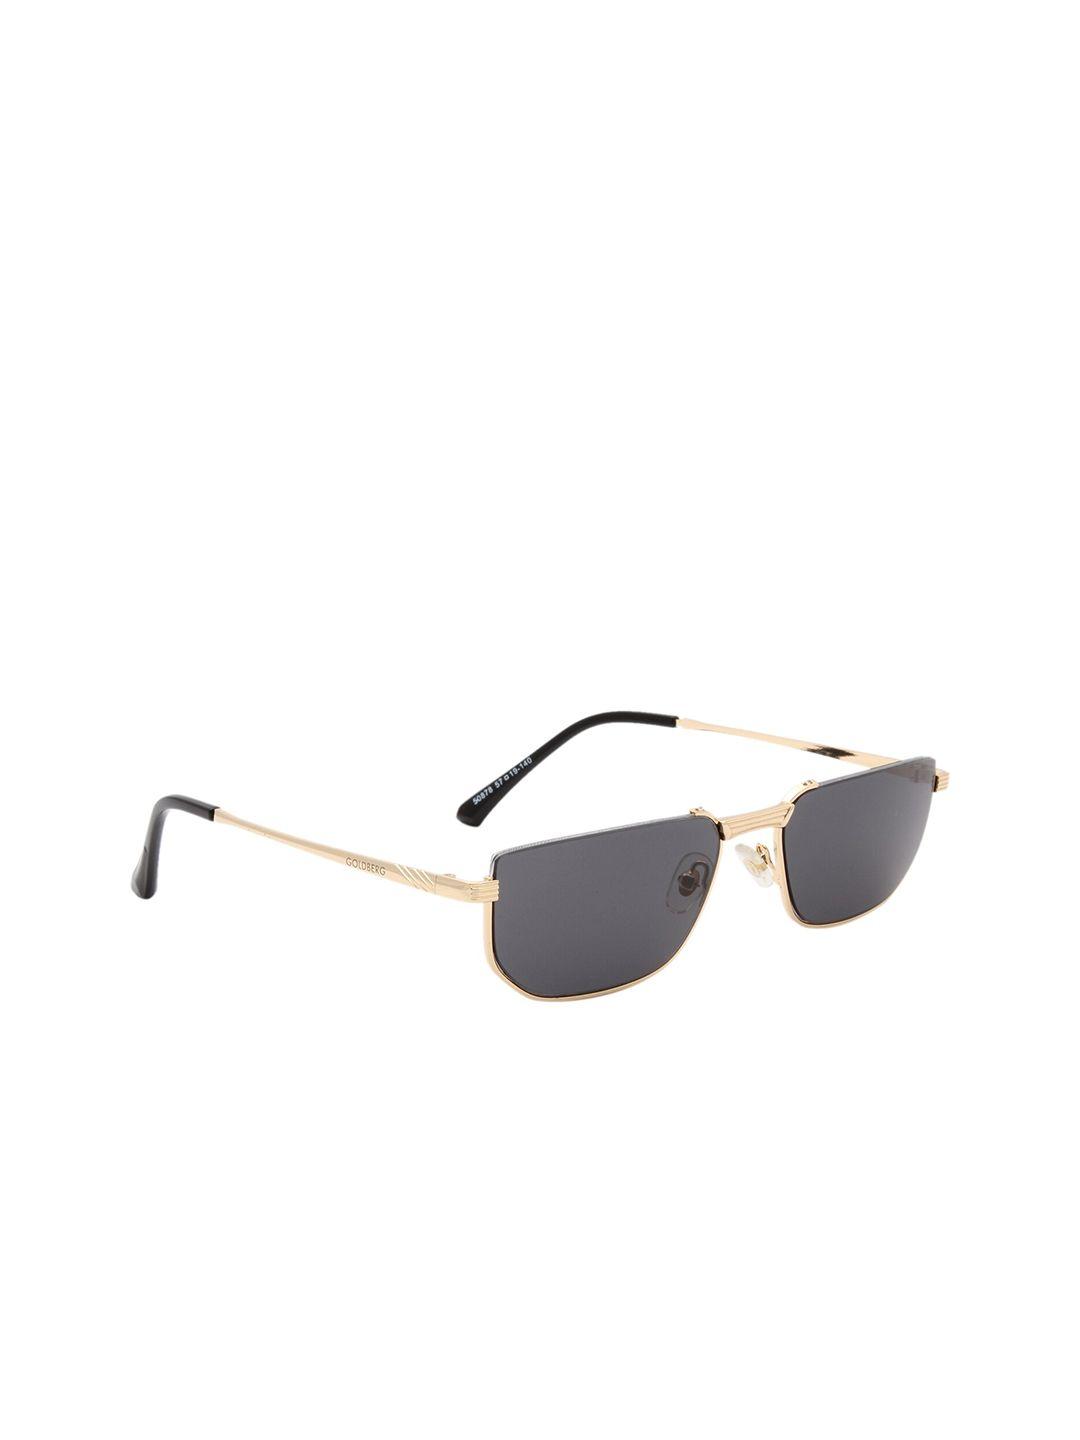 gold berg black lens & gold rectangle sunglasses with uv protected lens- gb-50878_gld-blk